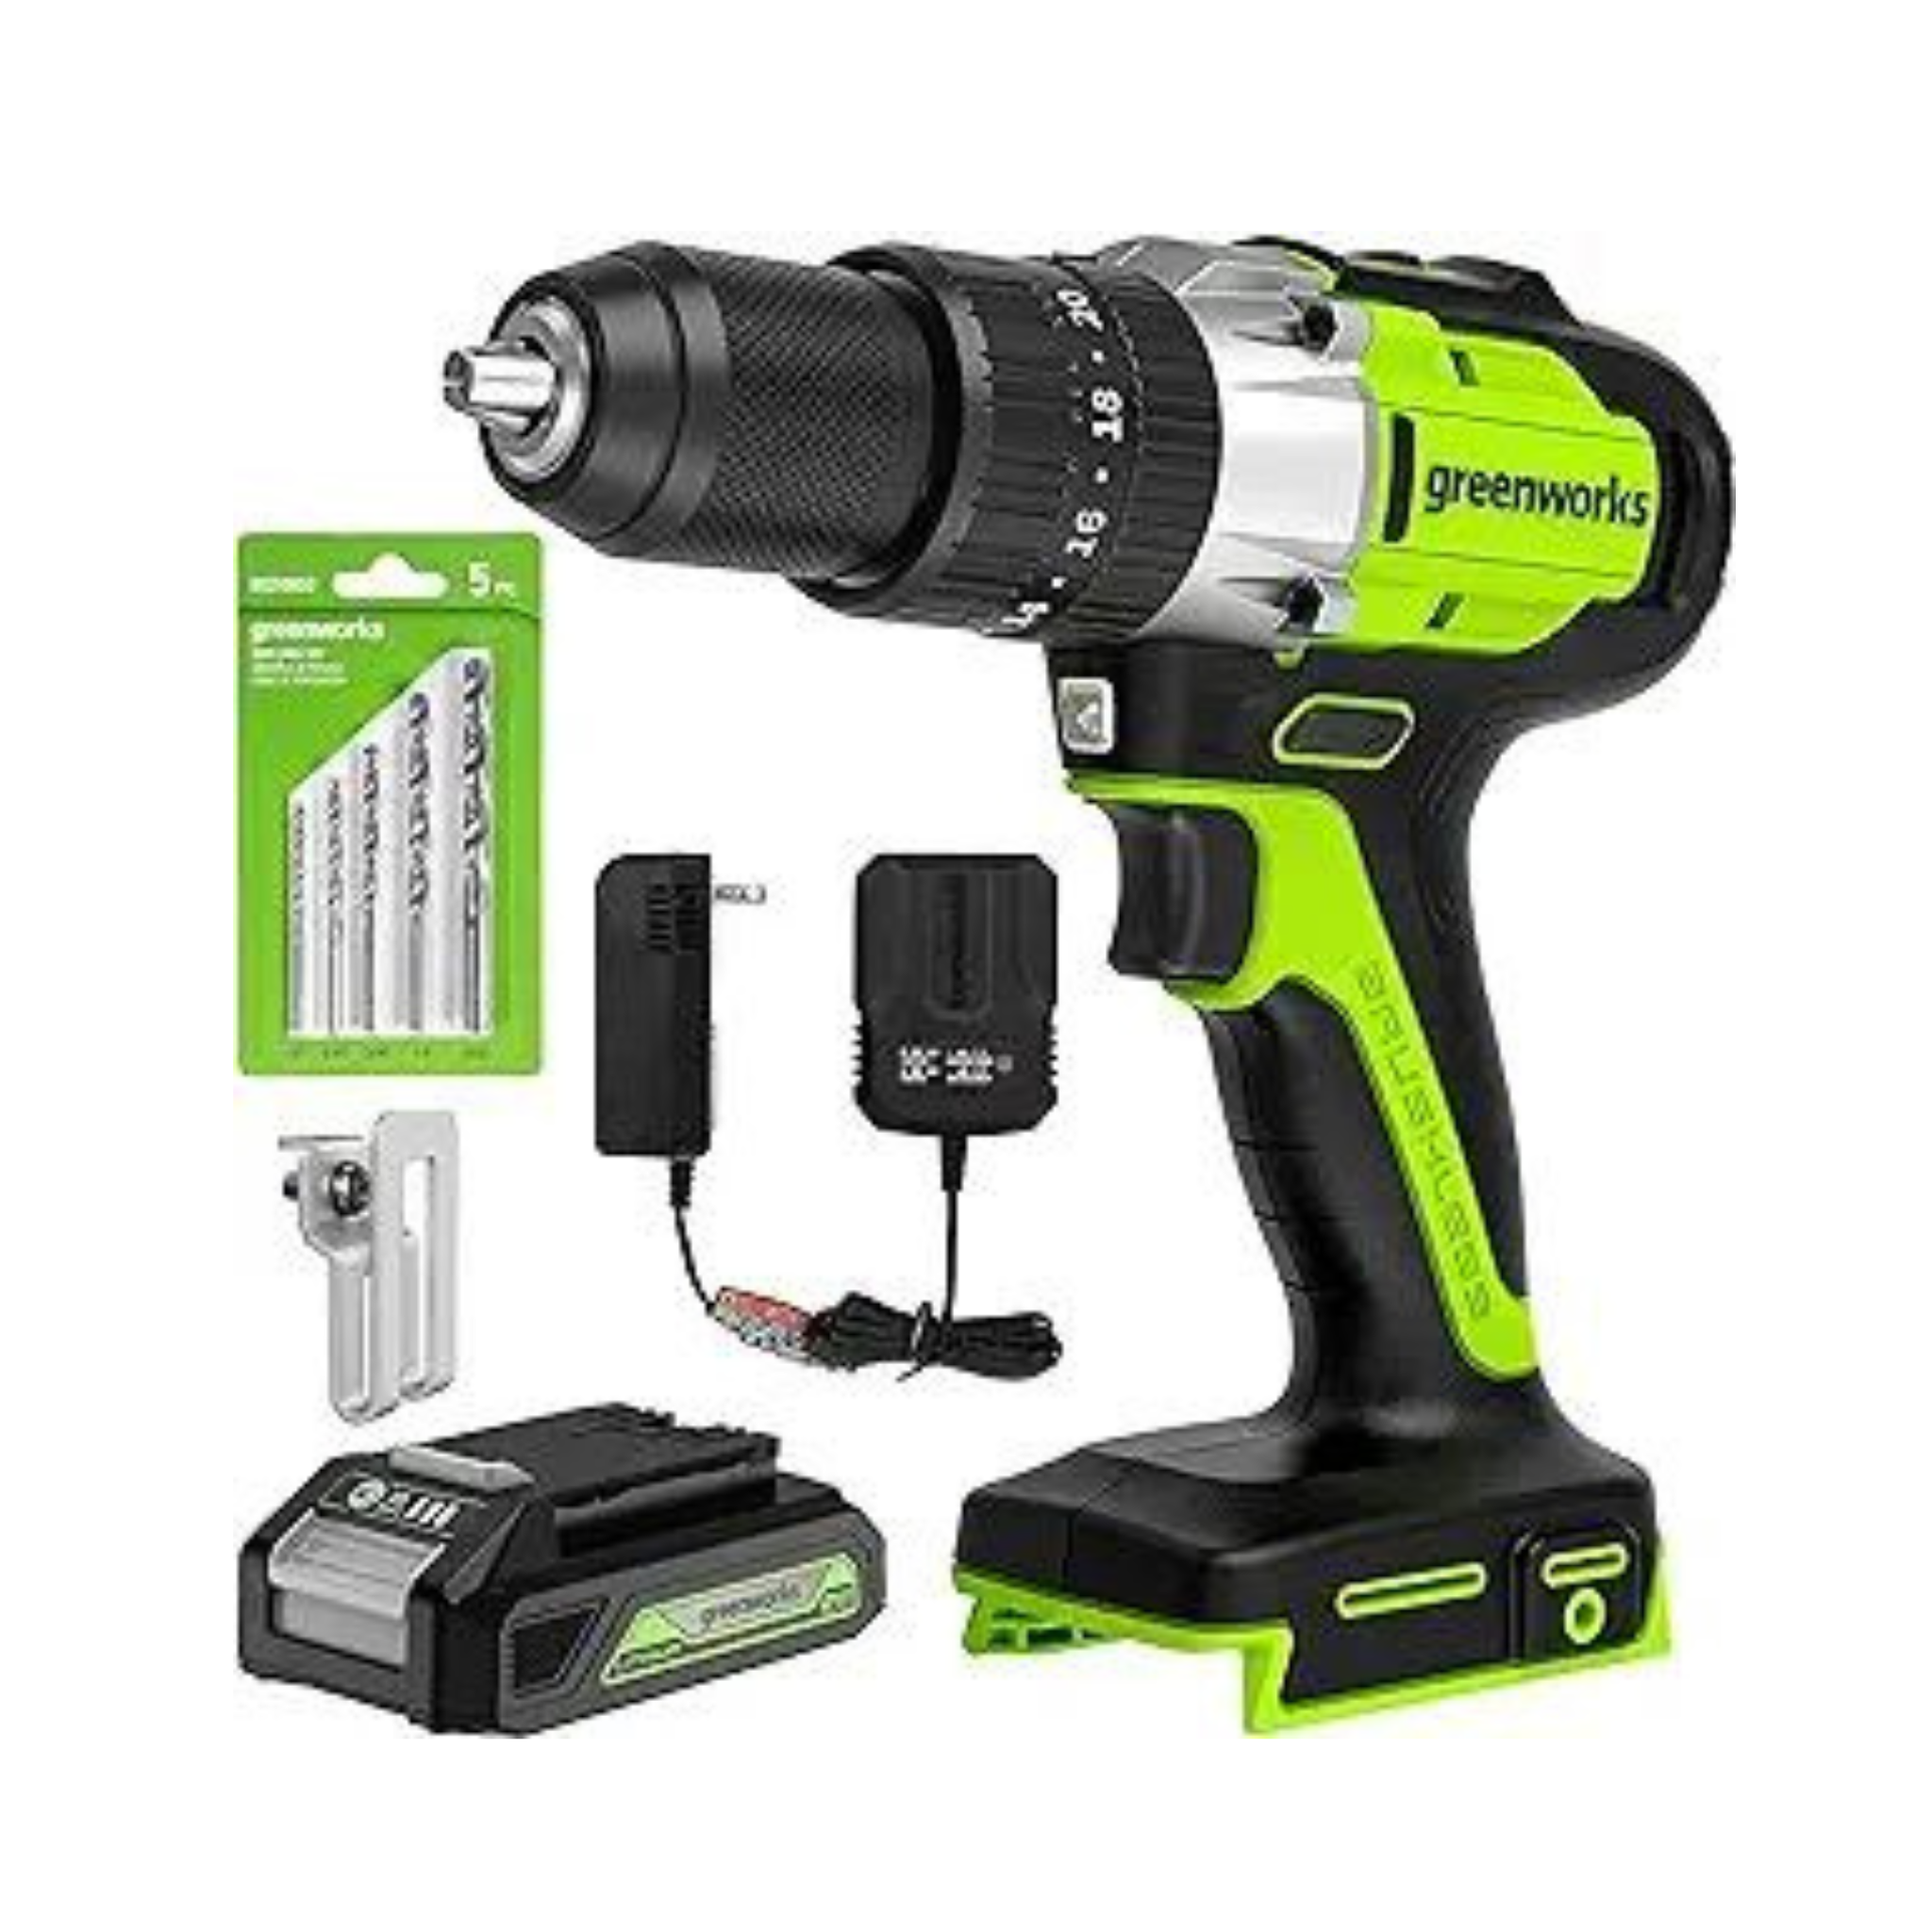 Greenworks 24V Brushless Hammer Drill + 5-Pc Drill Bits, 2.0Ah Battery & Charger